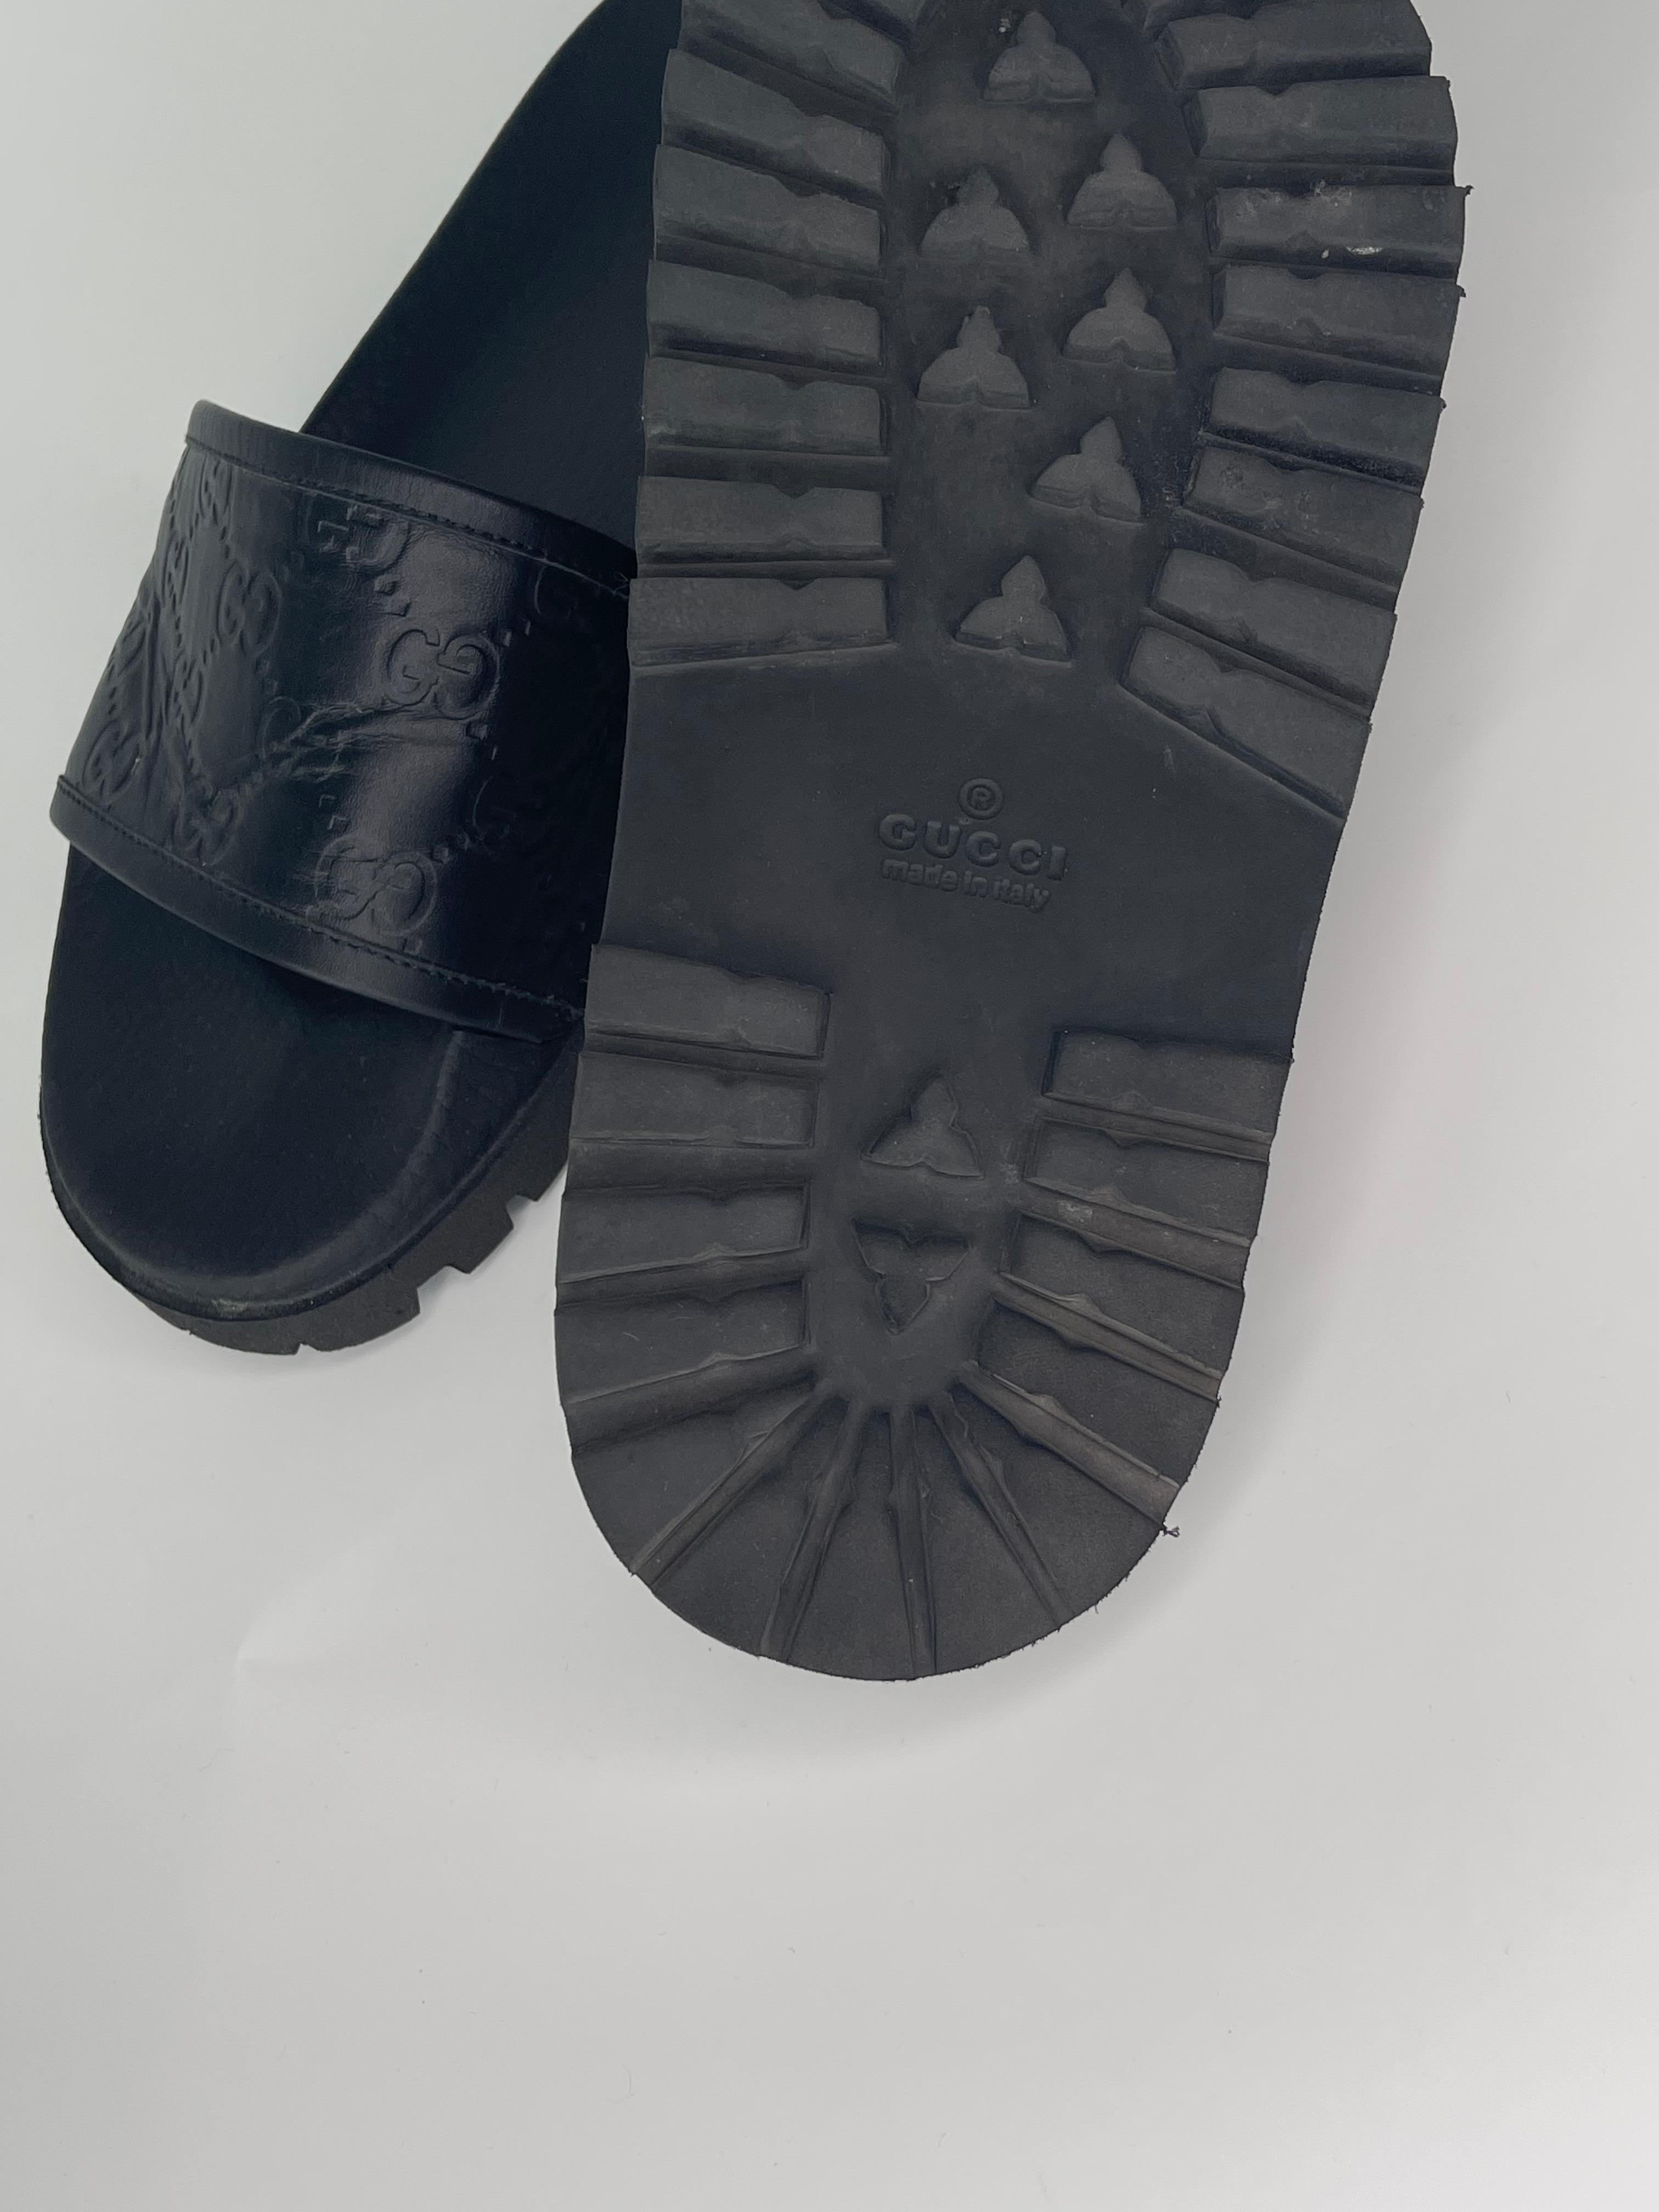  Gucci Signature Leather Slide Sandal Black Mens (6 US) 431070 In Excellent Condition In Montreal, Quebec